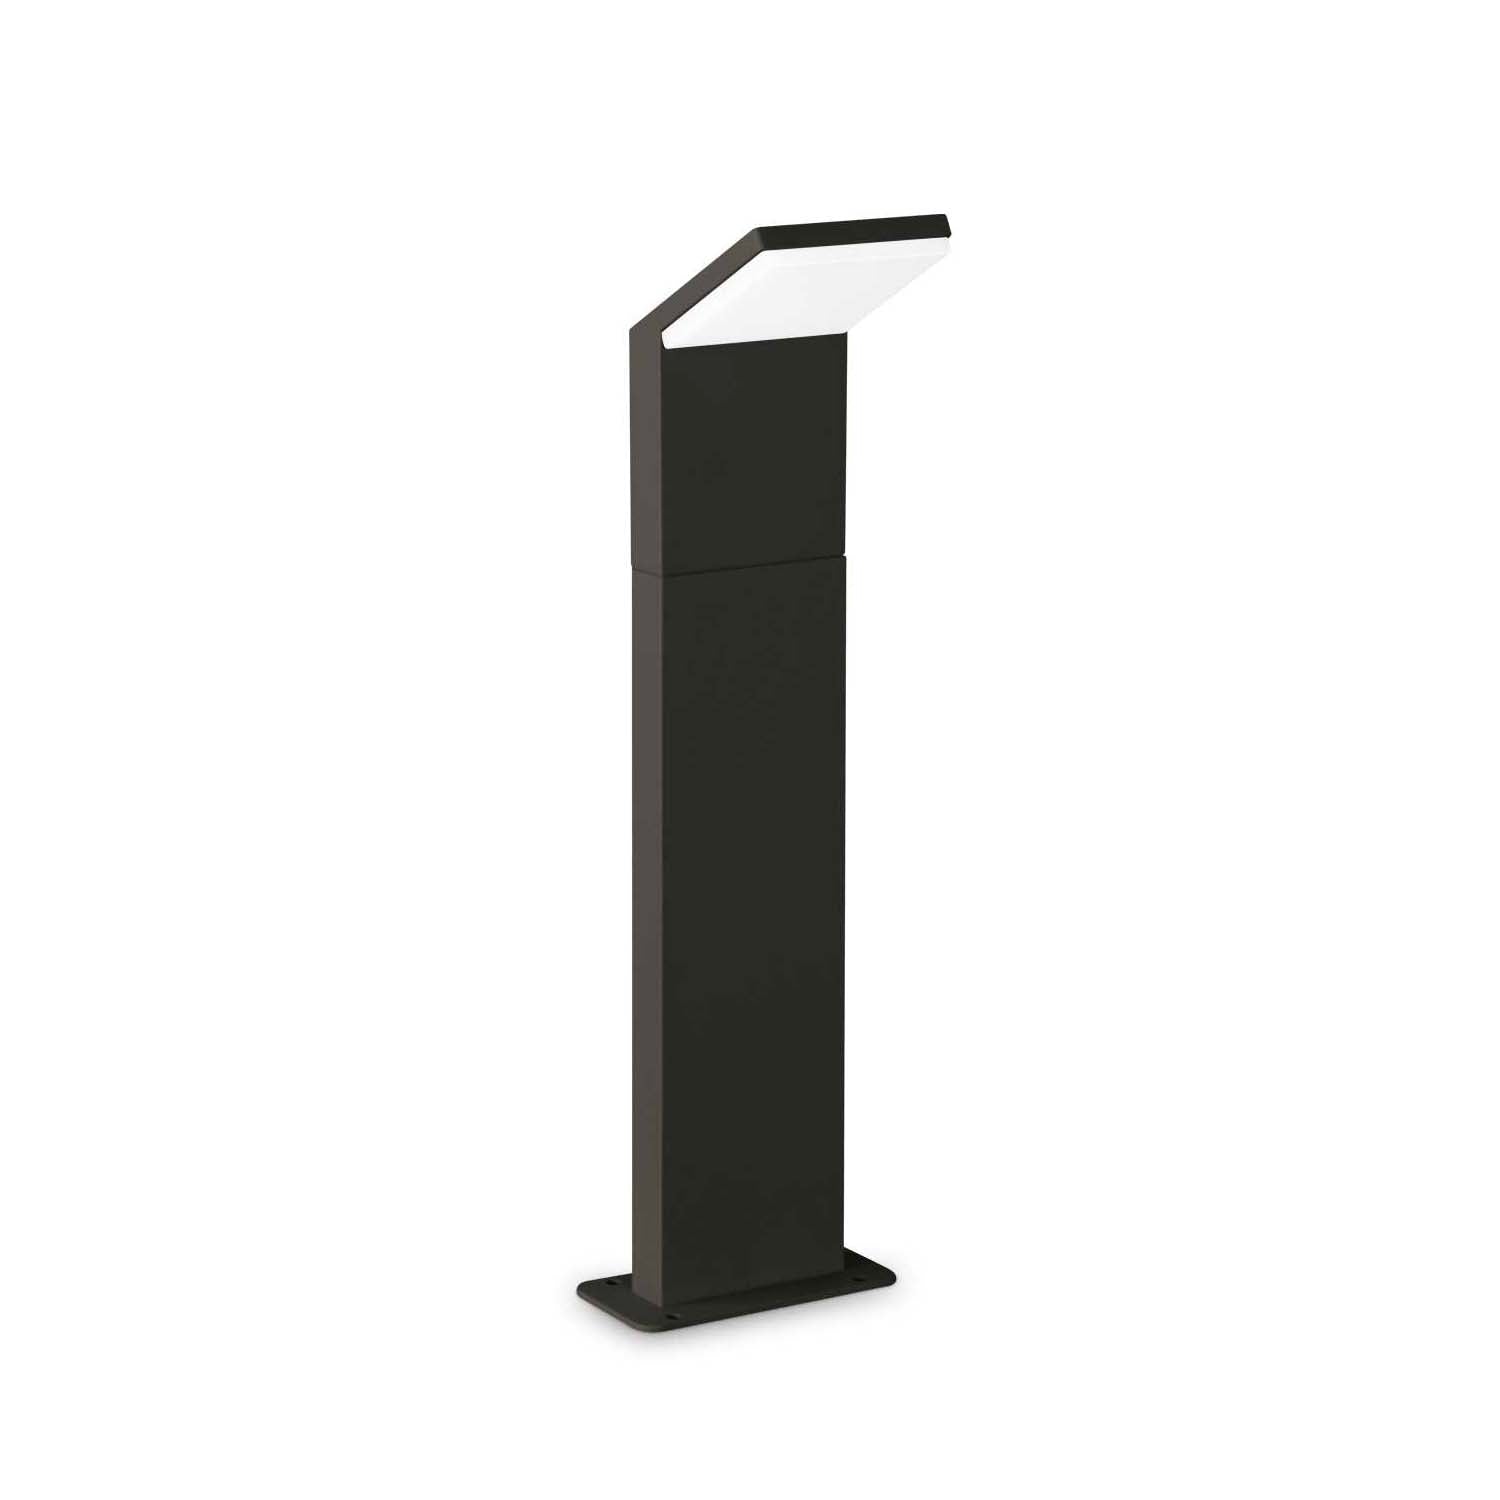 STYLE - Outdoor bollard light with integrated LED